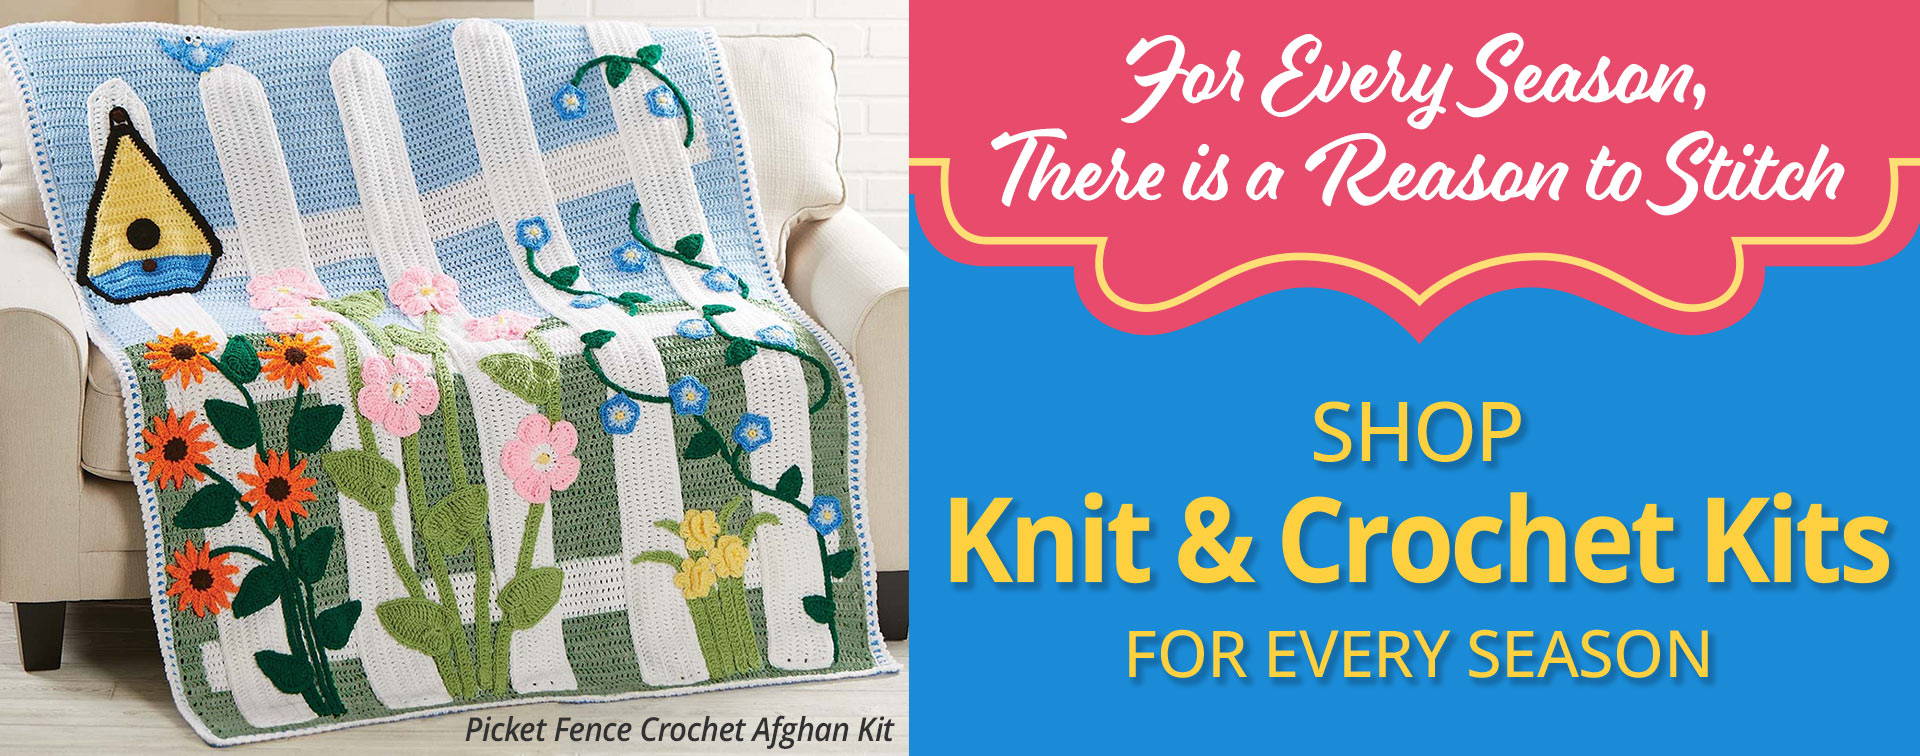 For Every Season, There is a Reason to Stitch - SHOP Knit & Crochet Kits FOR EVERY SEASON - Picket Fence Crochet Afghan Kit